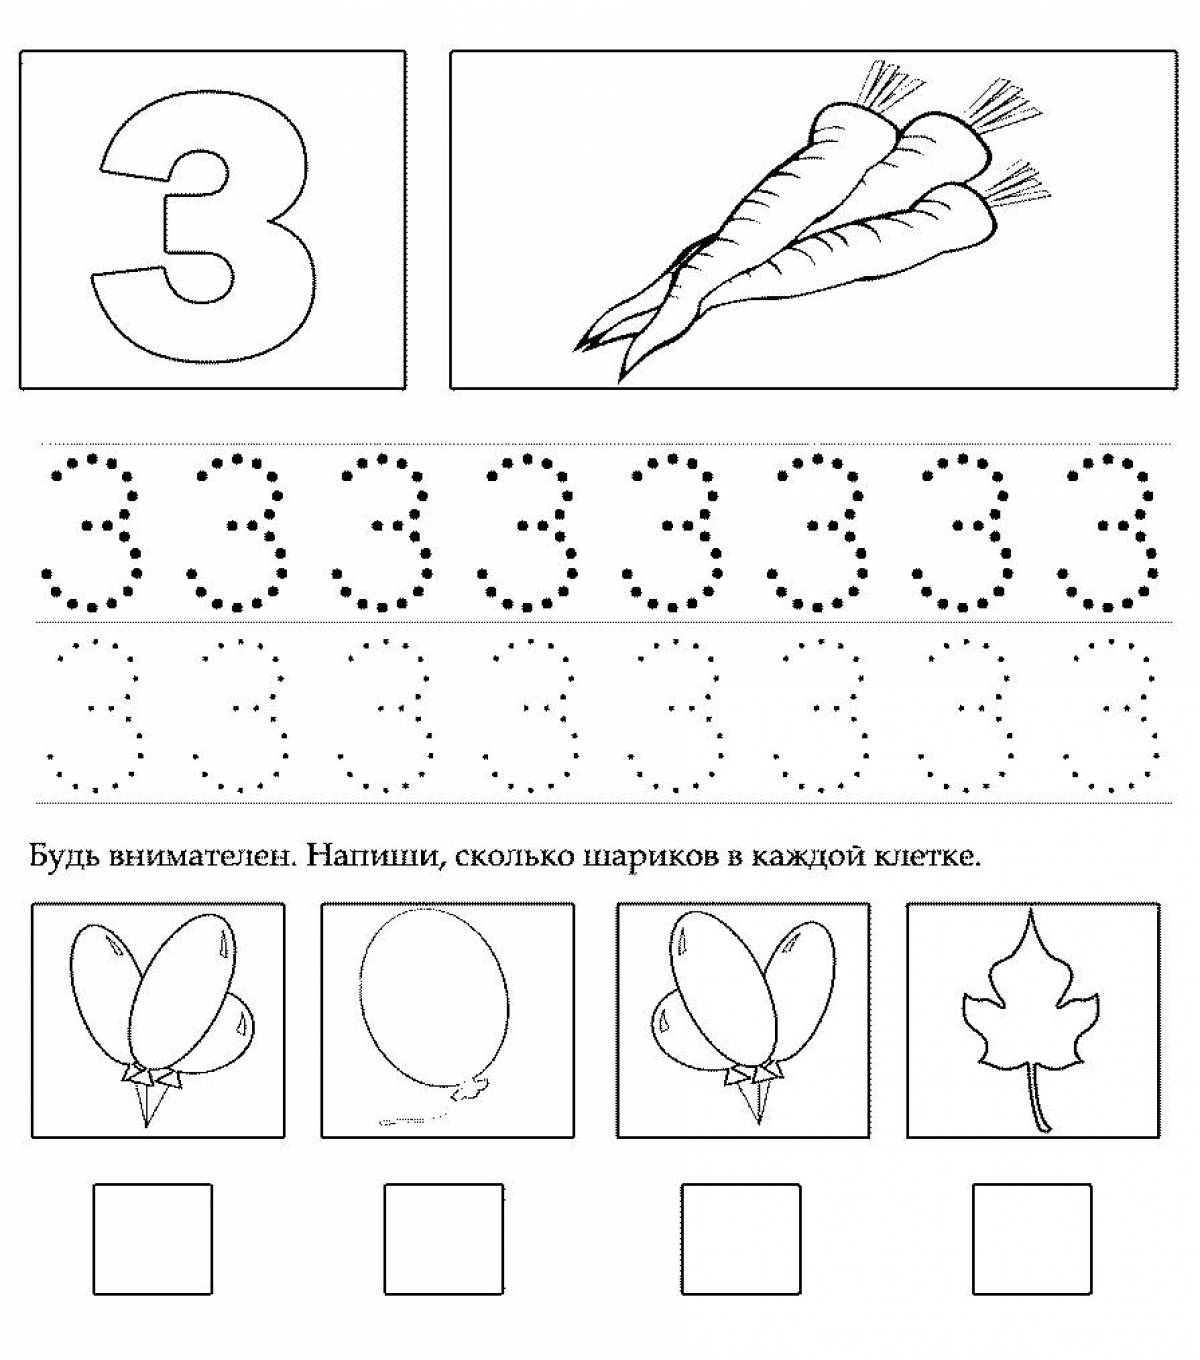 Learning numbers 3